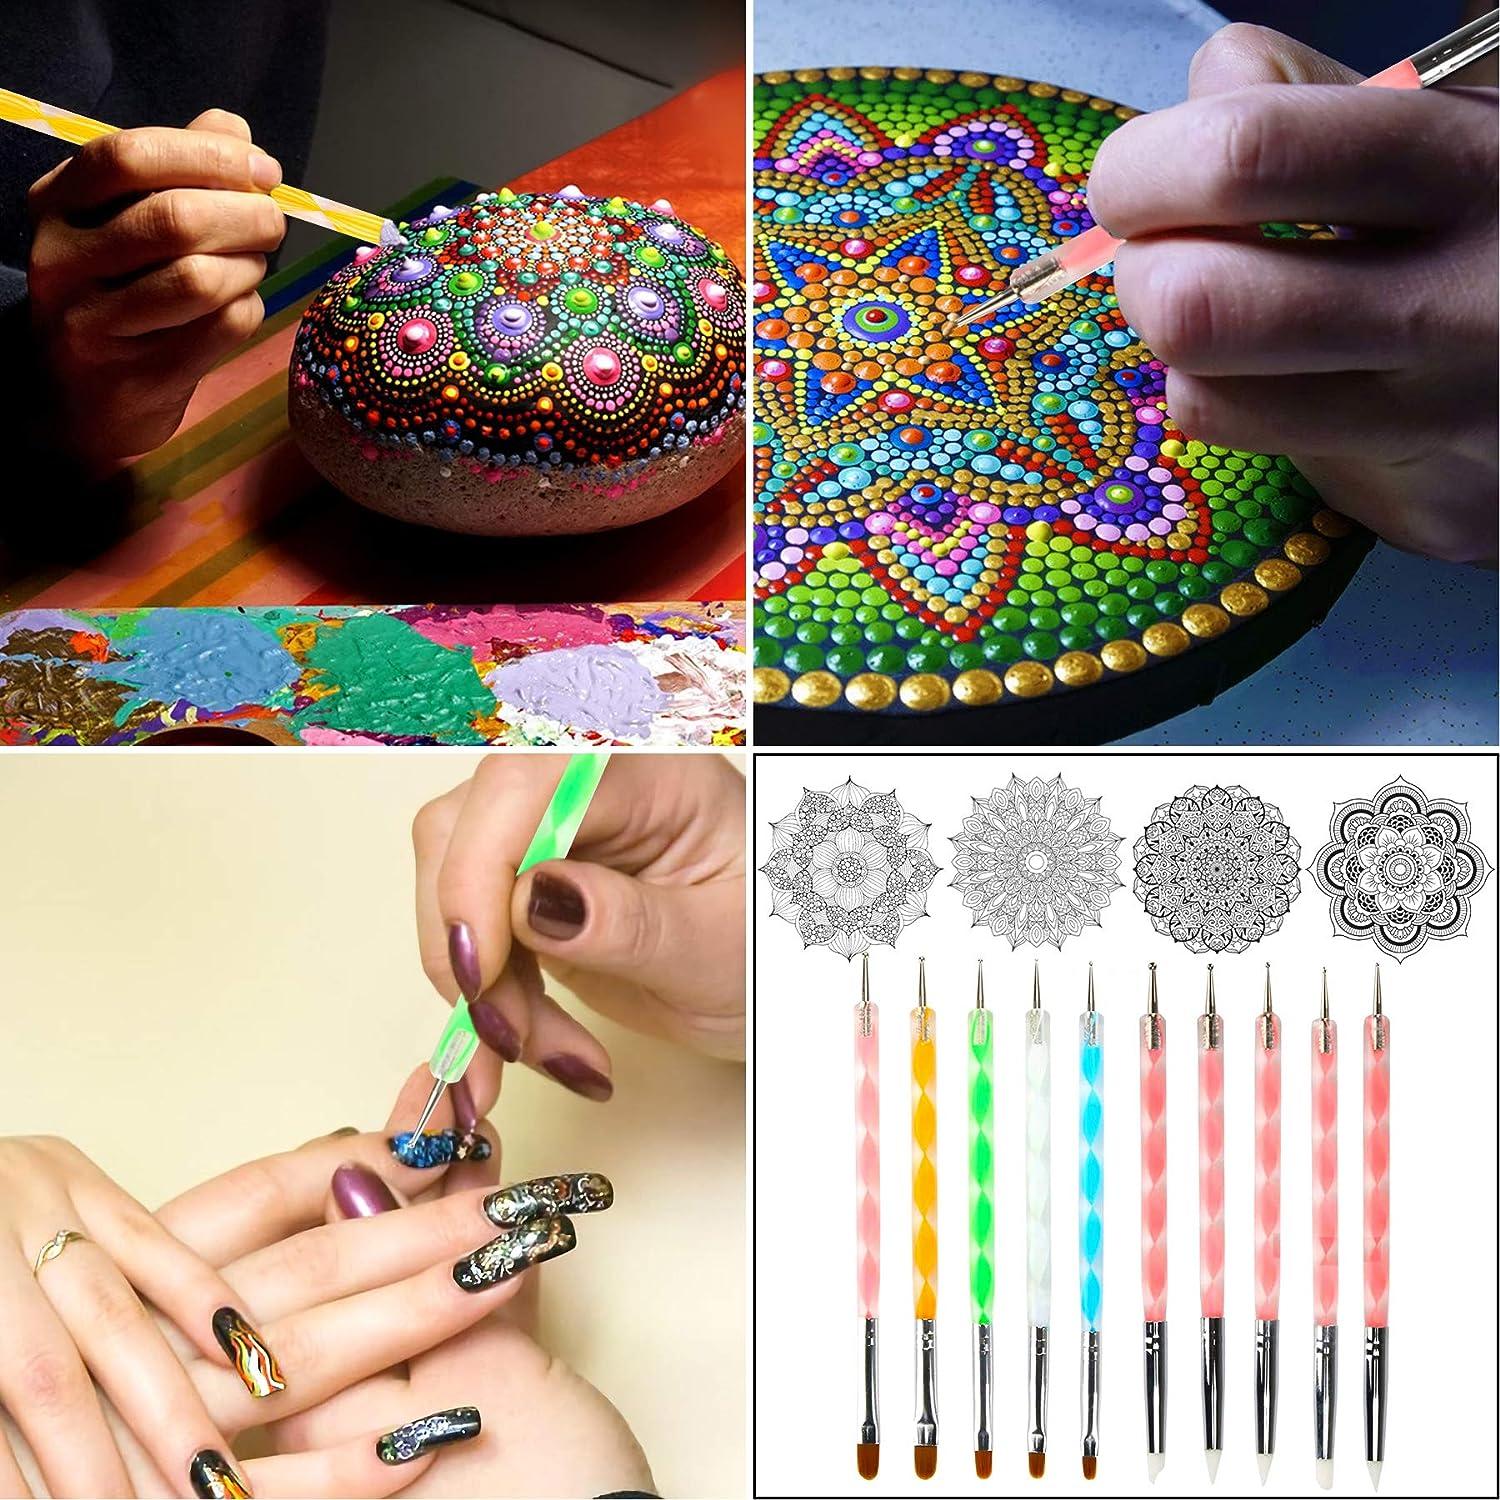 A multi-purpose dotting tool set for art and creating dotted mandalas